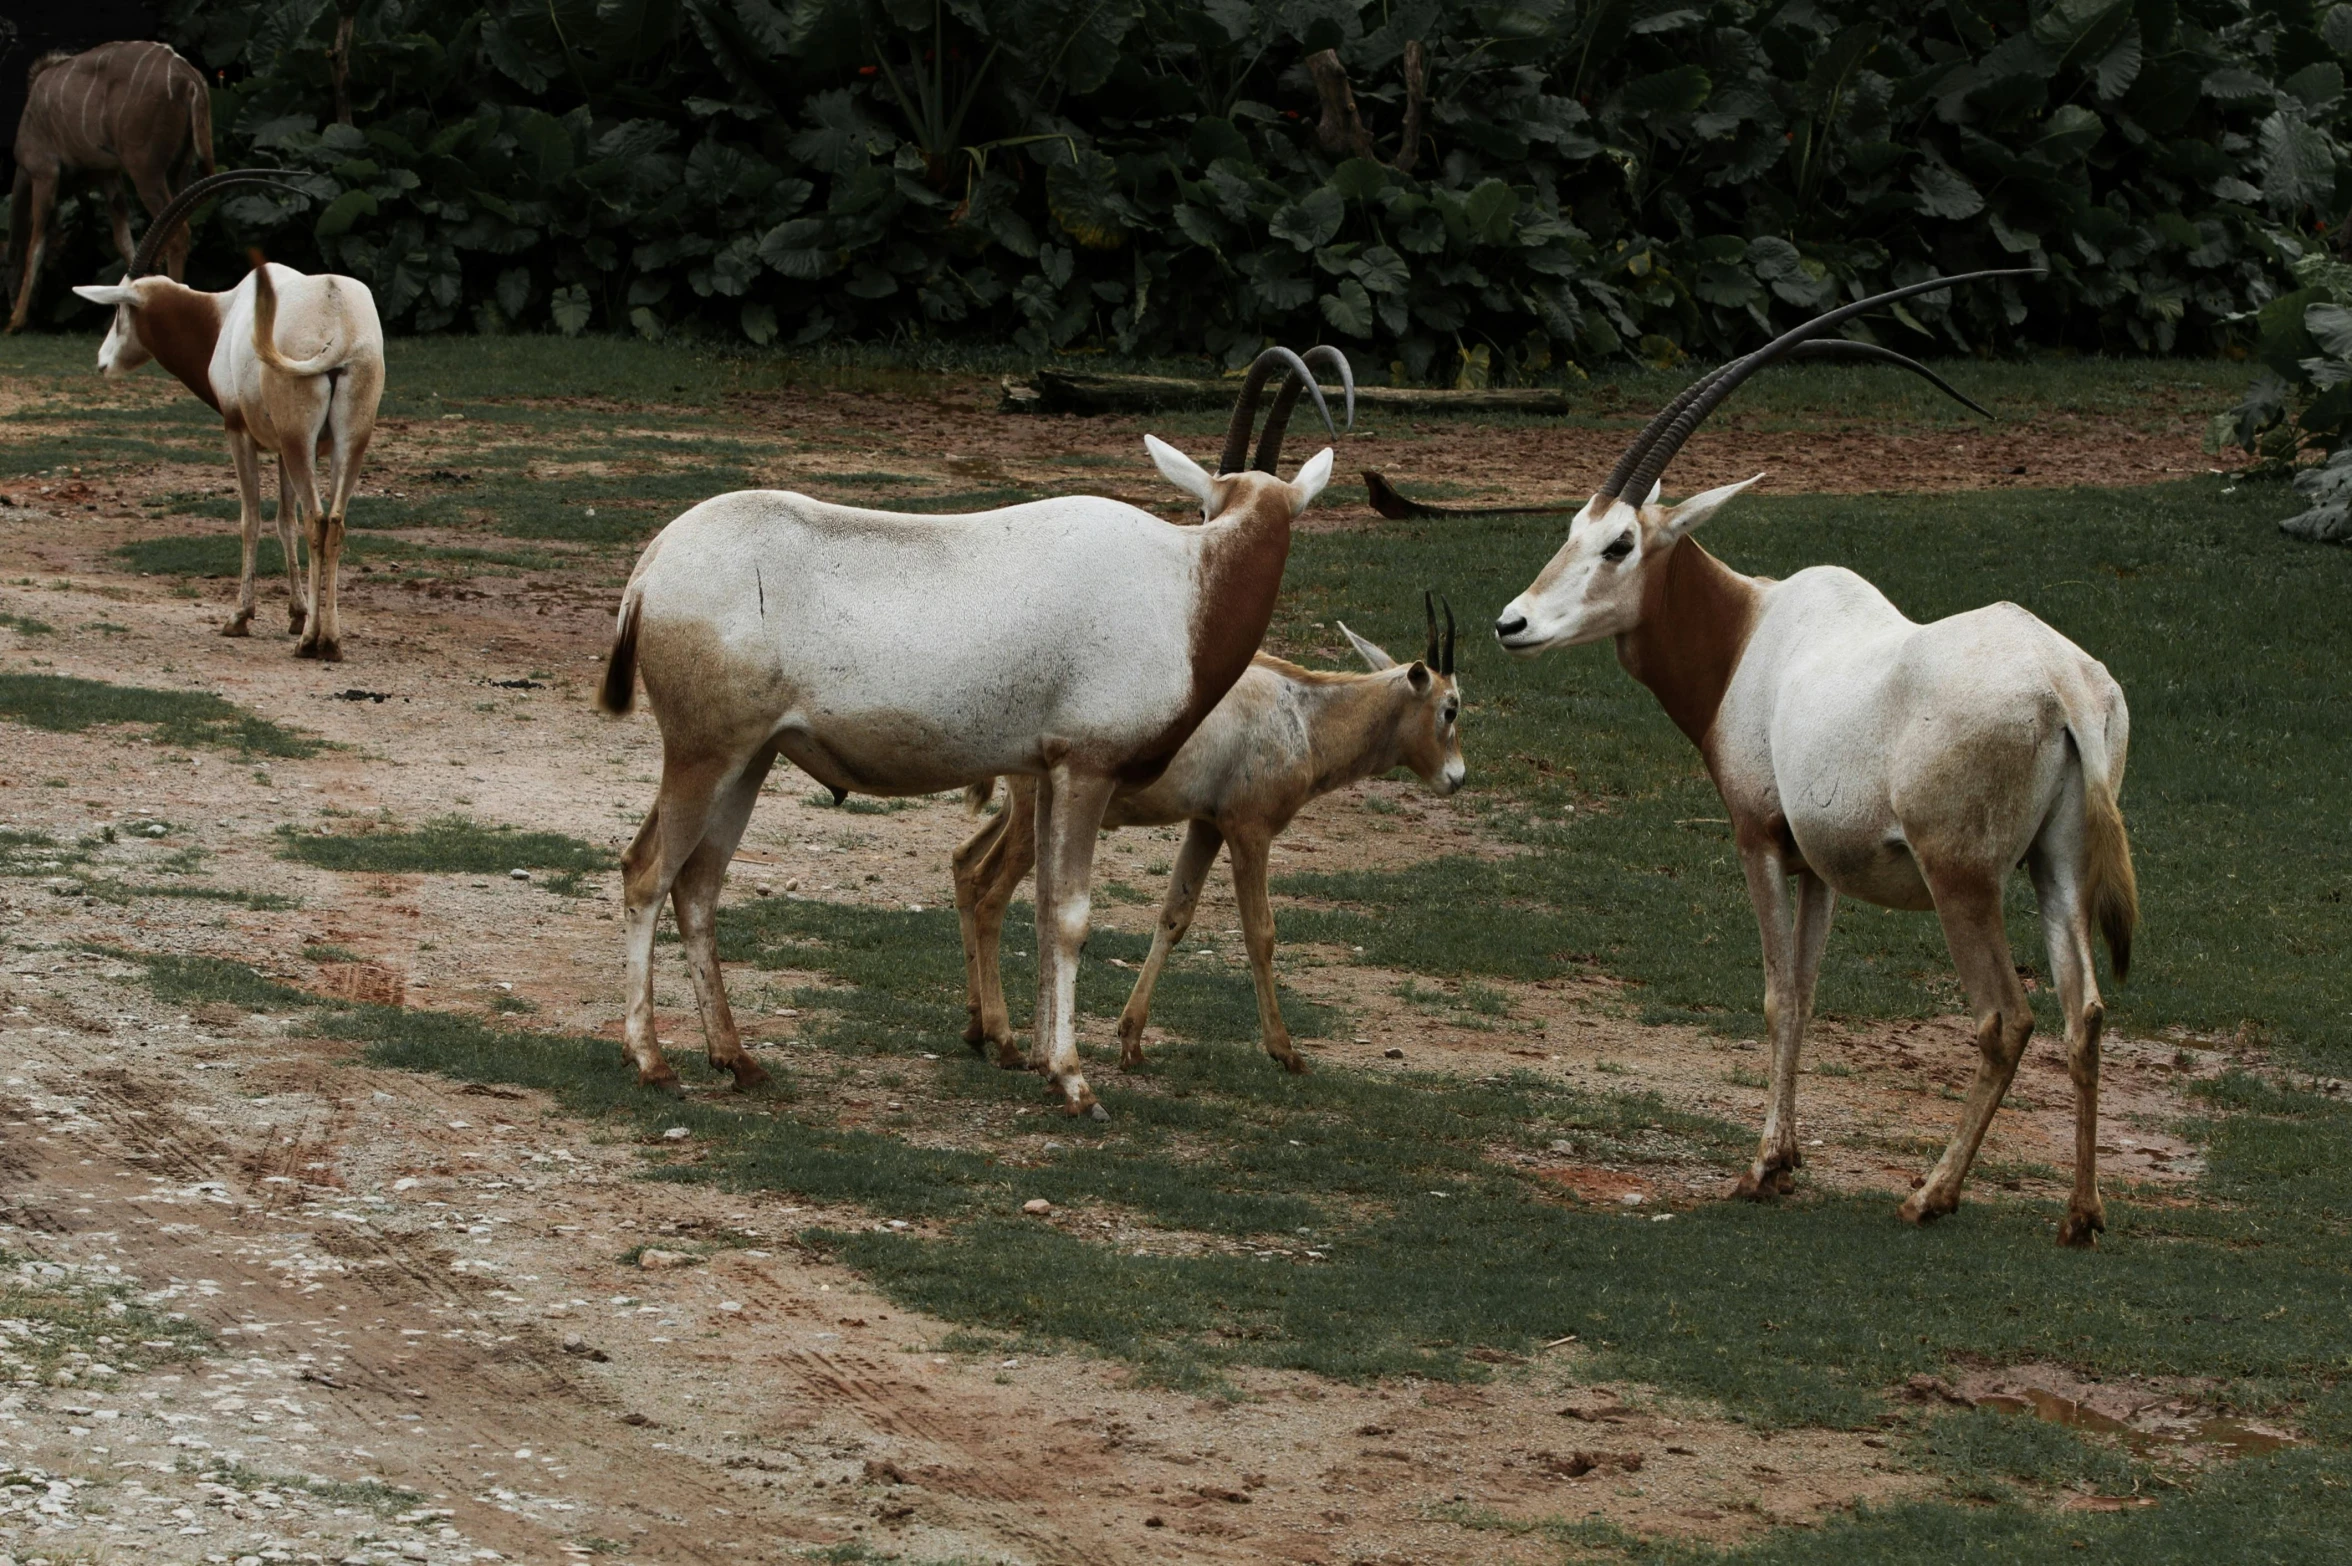 there are three goats walking side by side